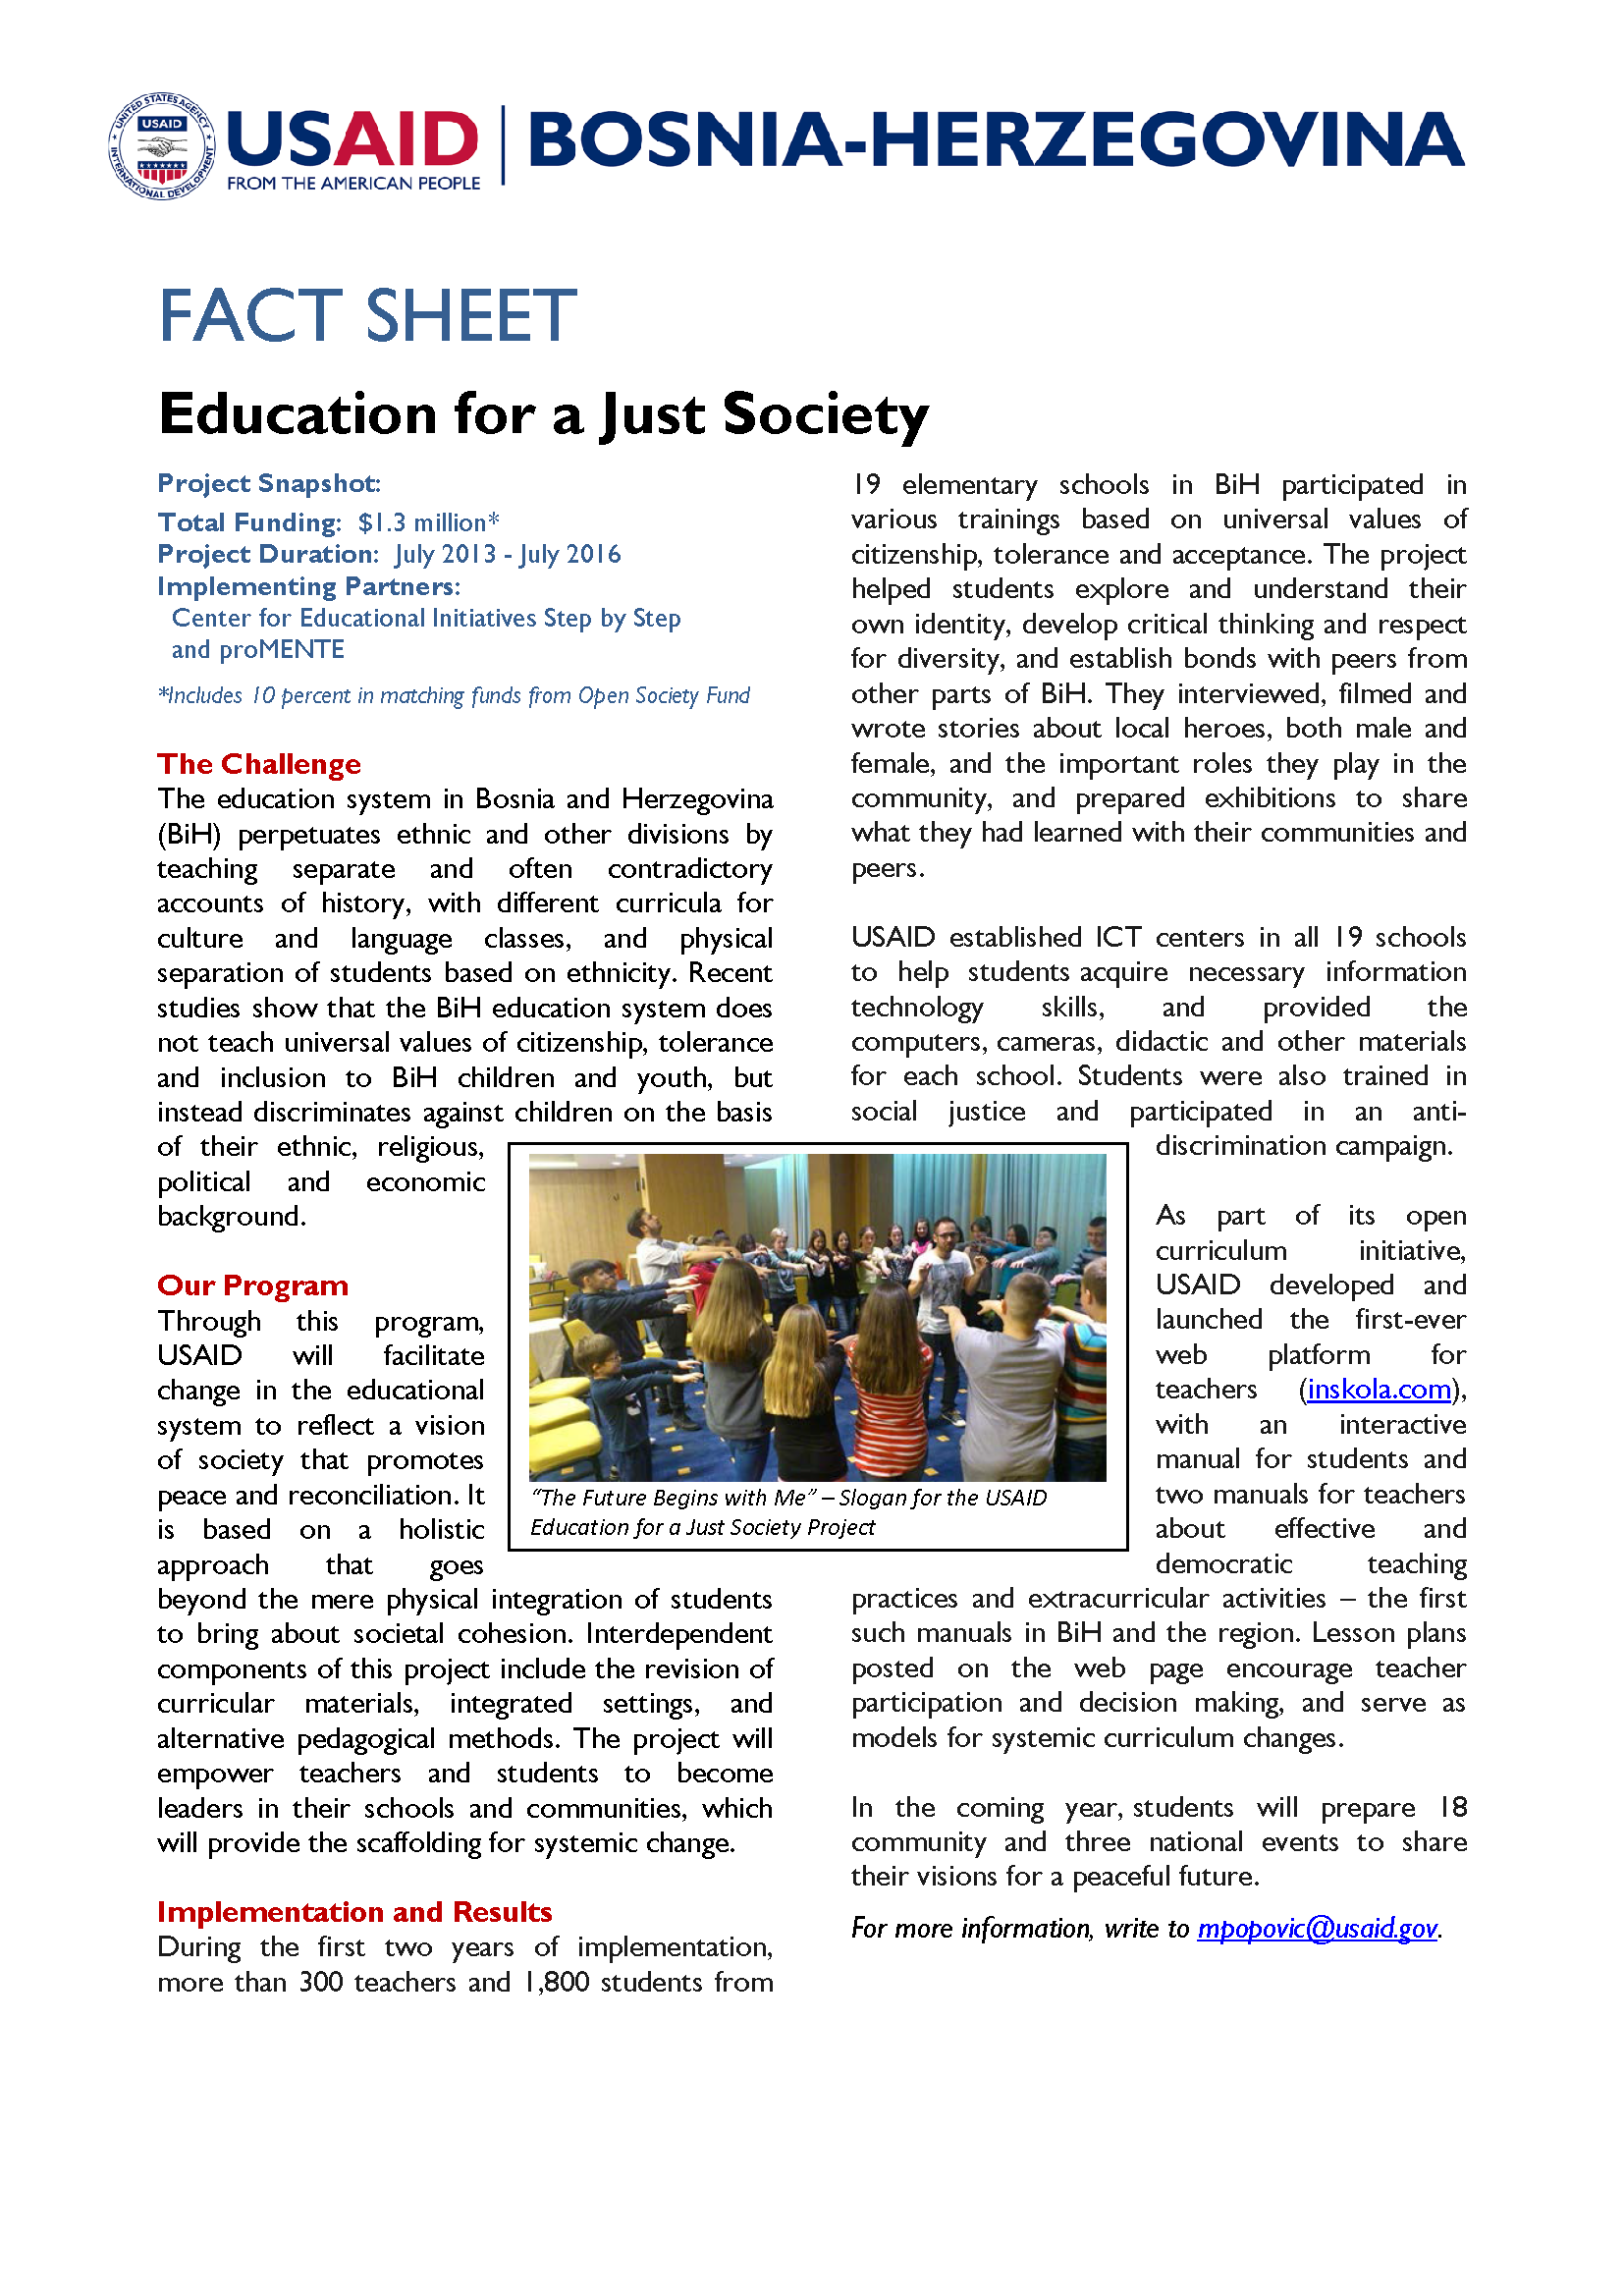 Education for a Just Society